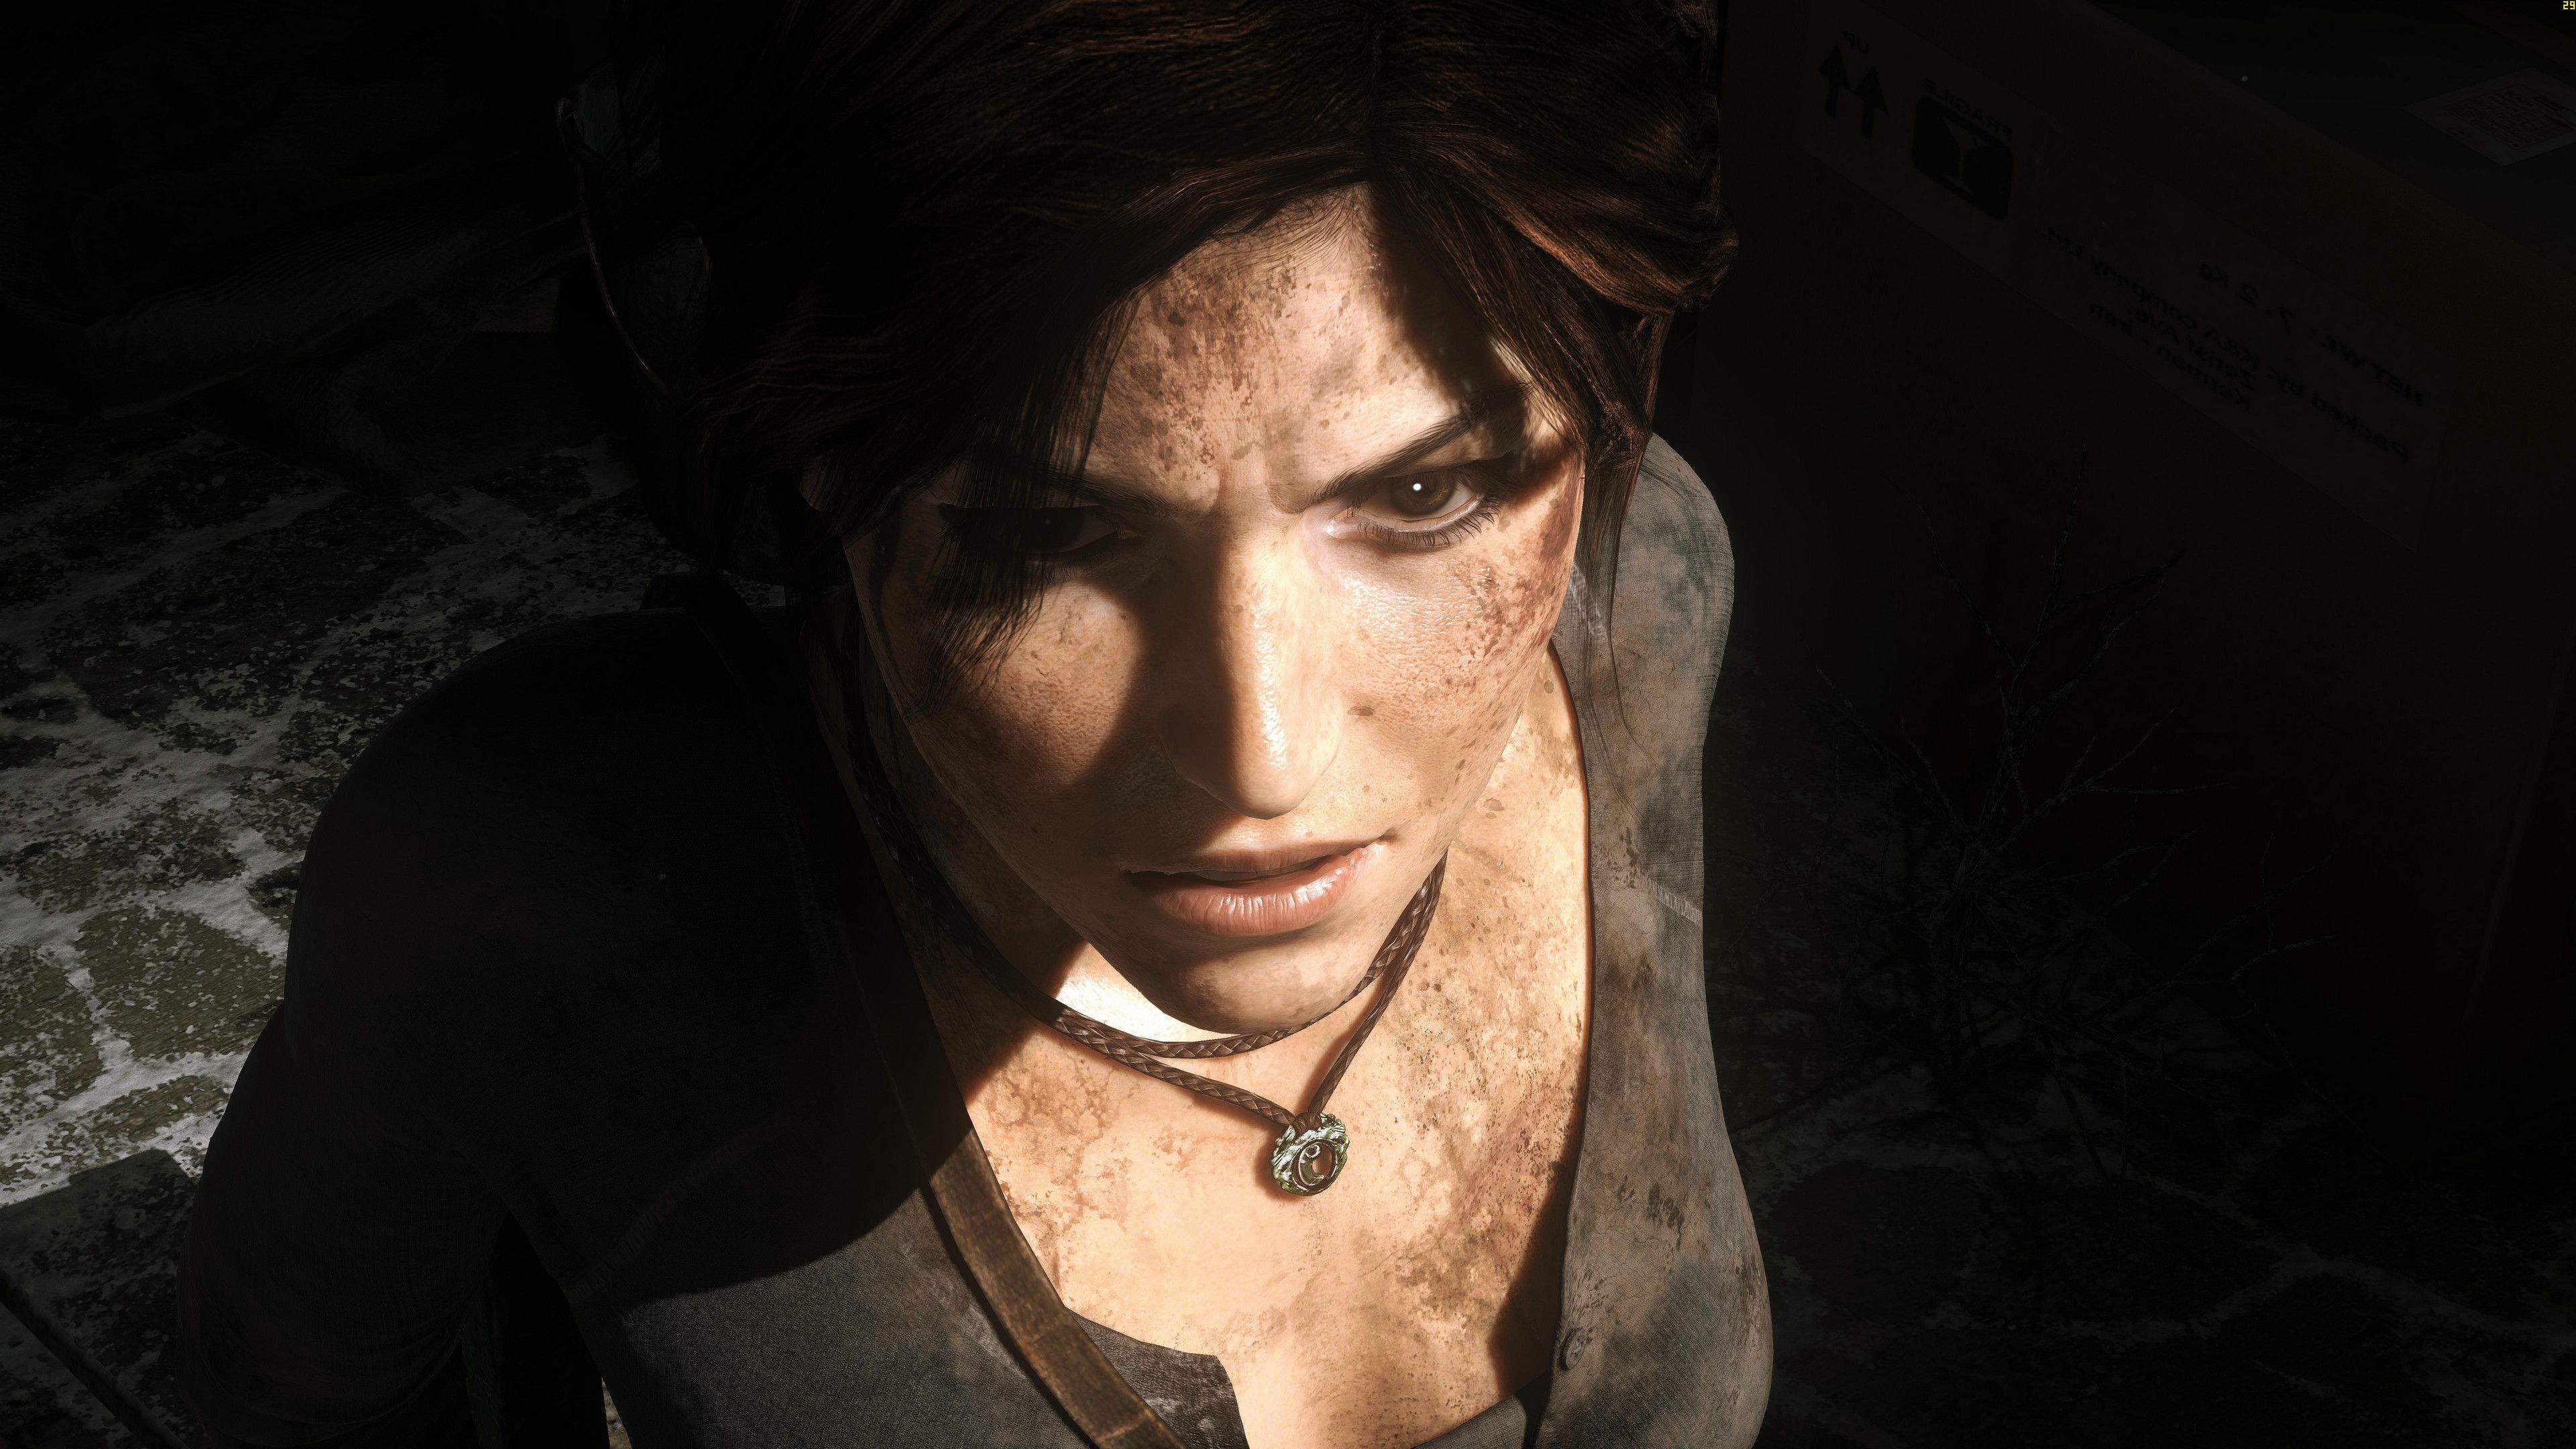 Rise of the tomb raider image 6